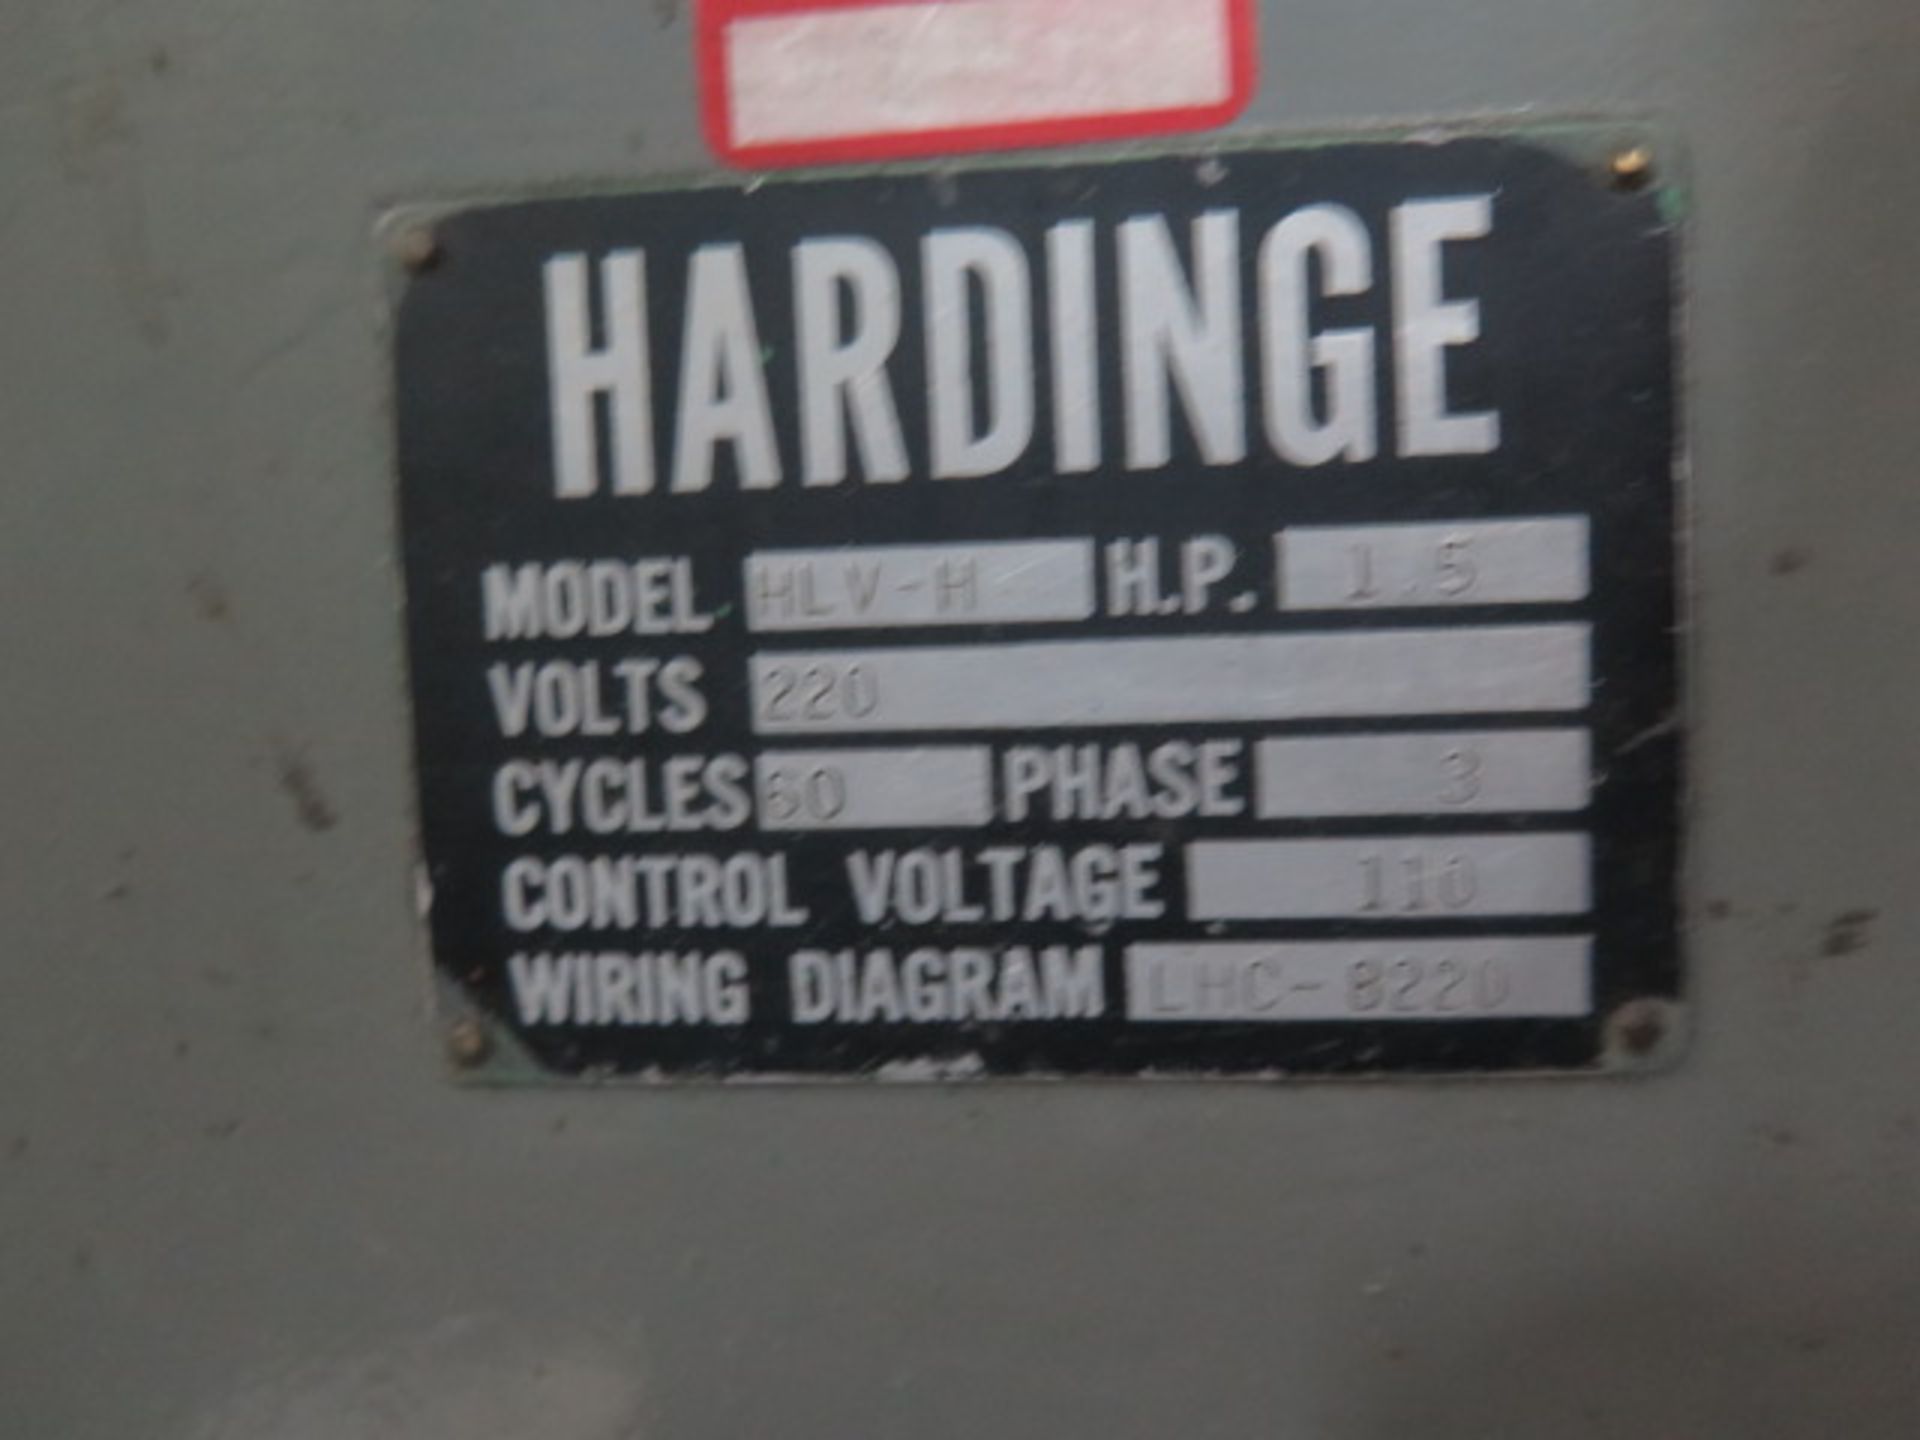 Hardinge HLV-H Wide Bed Tool Room Lathe s/n HLV-H-3211 w/ 125-3000 RPM, Inch Threading, SOLD AS IS - Image 13 of 13